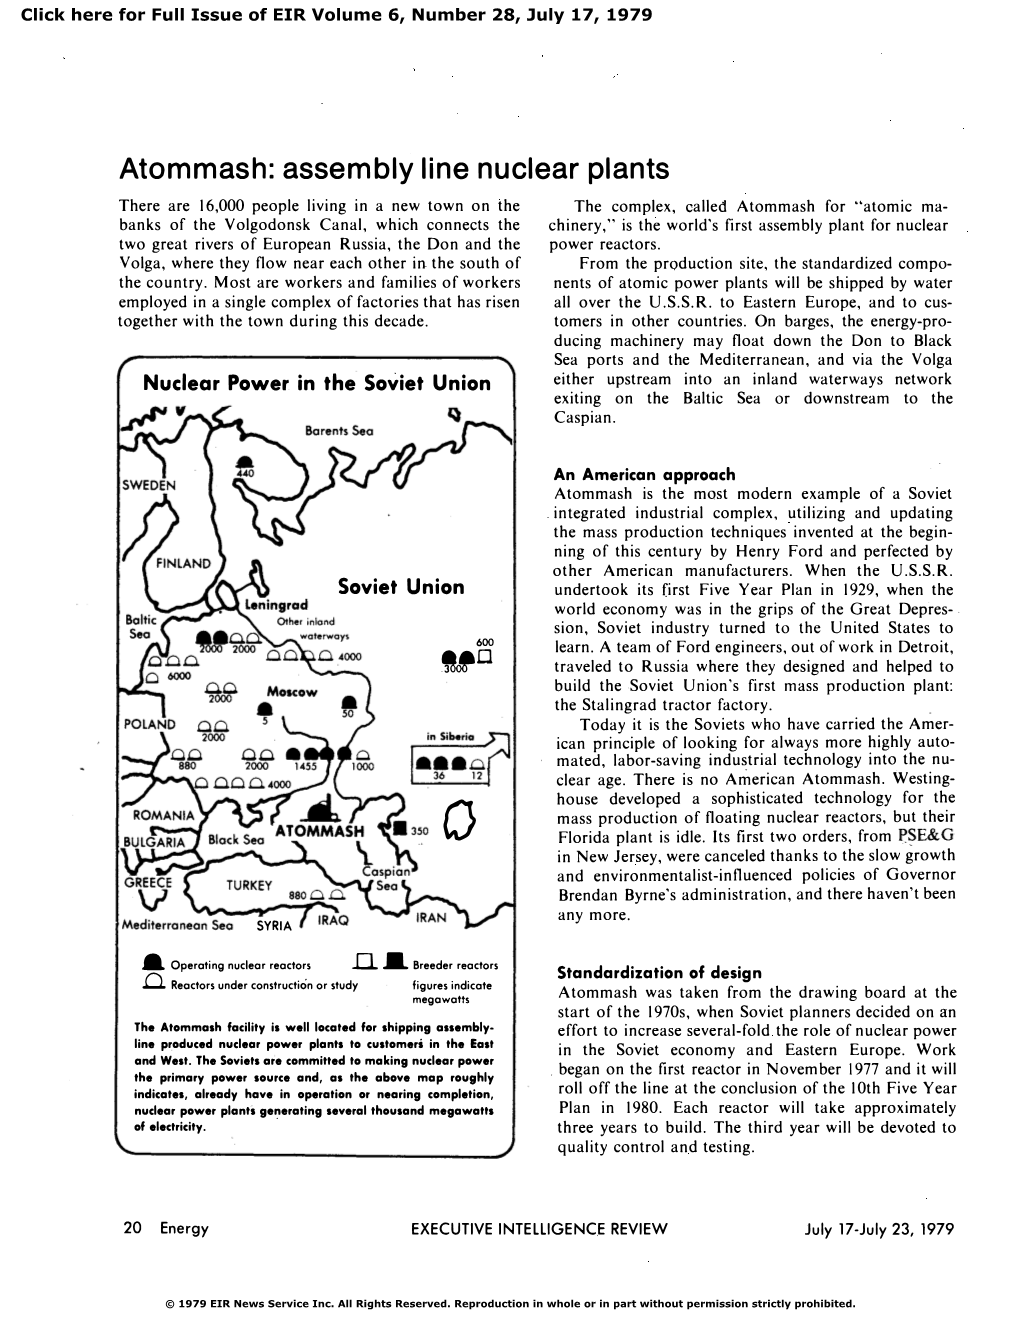 Atommash: Assembly Line Nuclear Plants